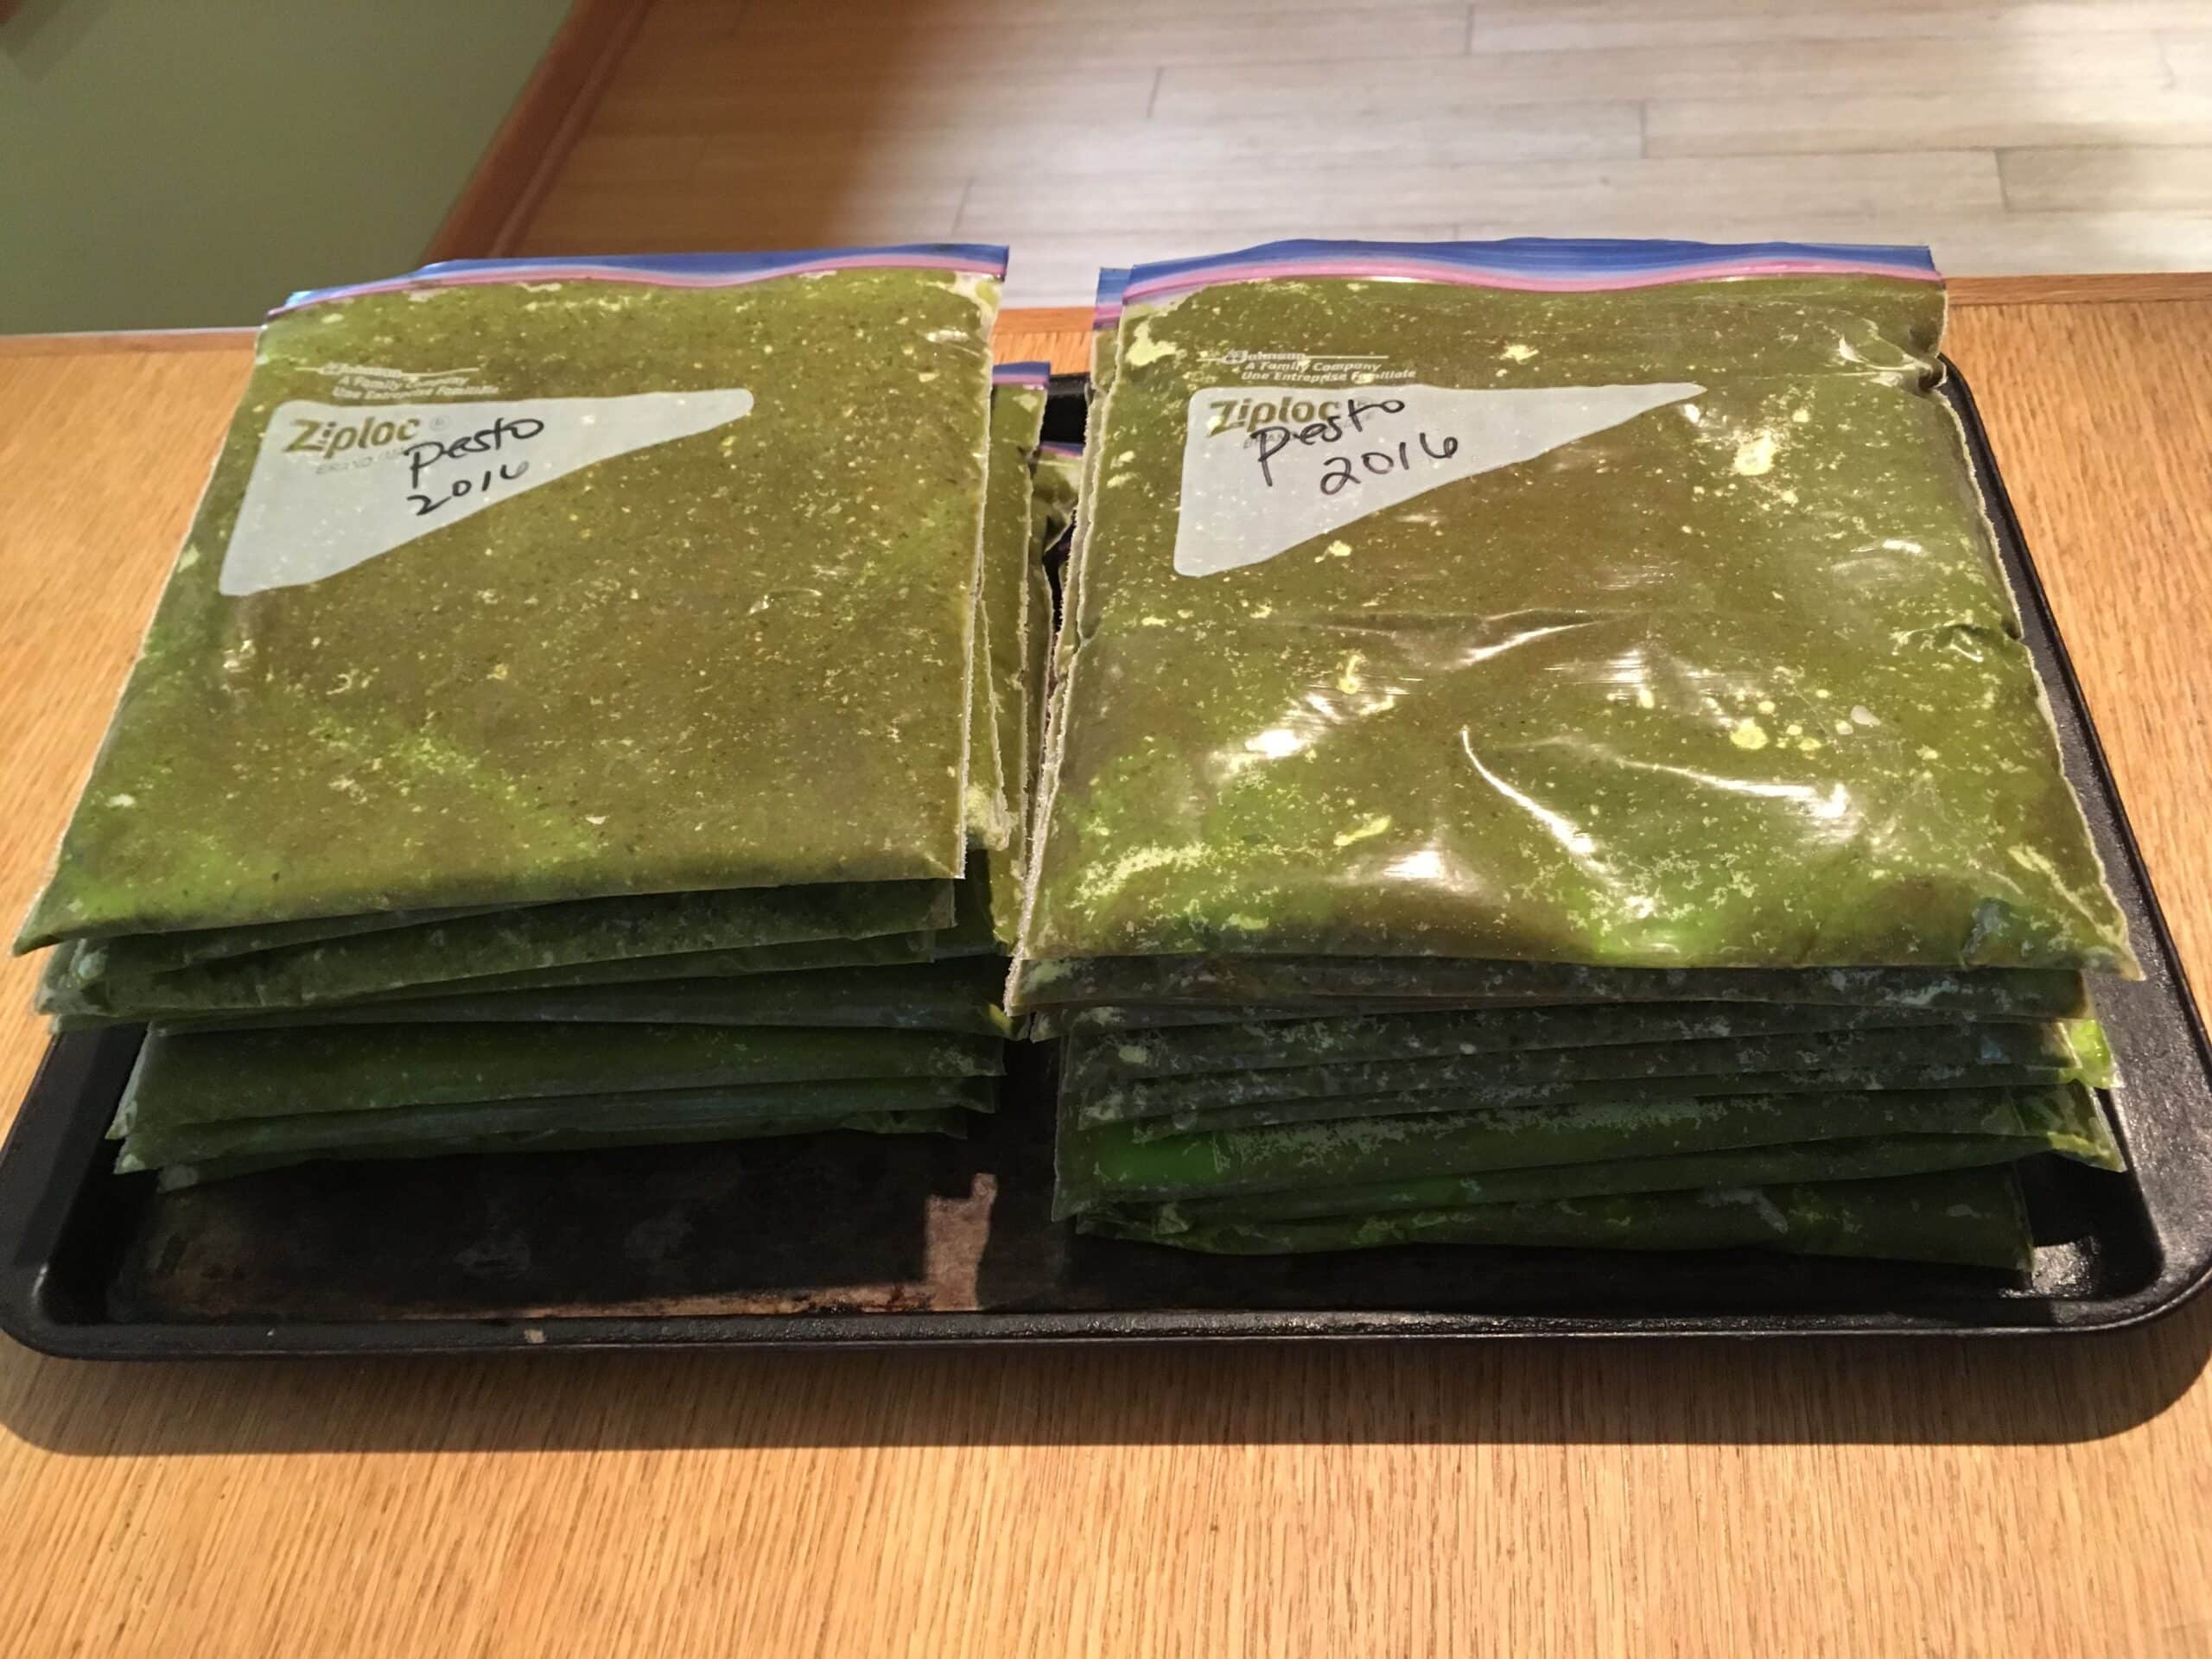 24 Quart Bags of Frozen Pesto (without cheese)